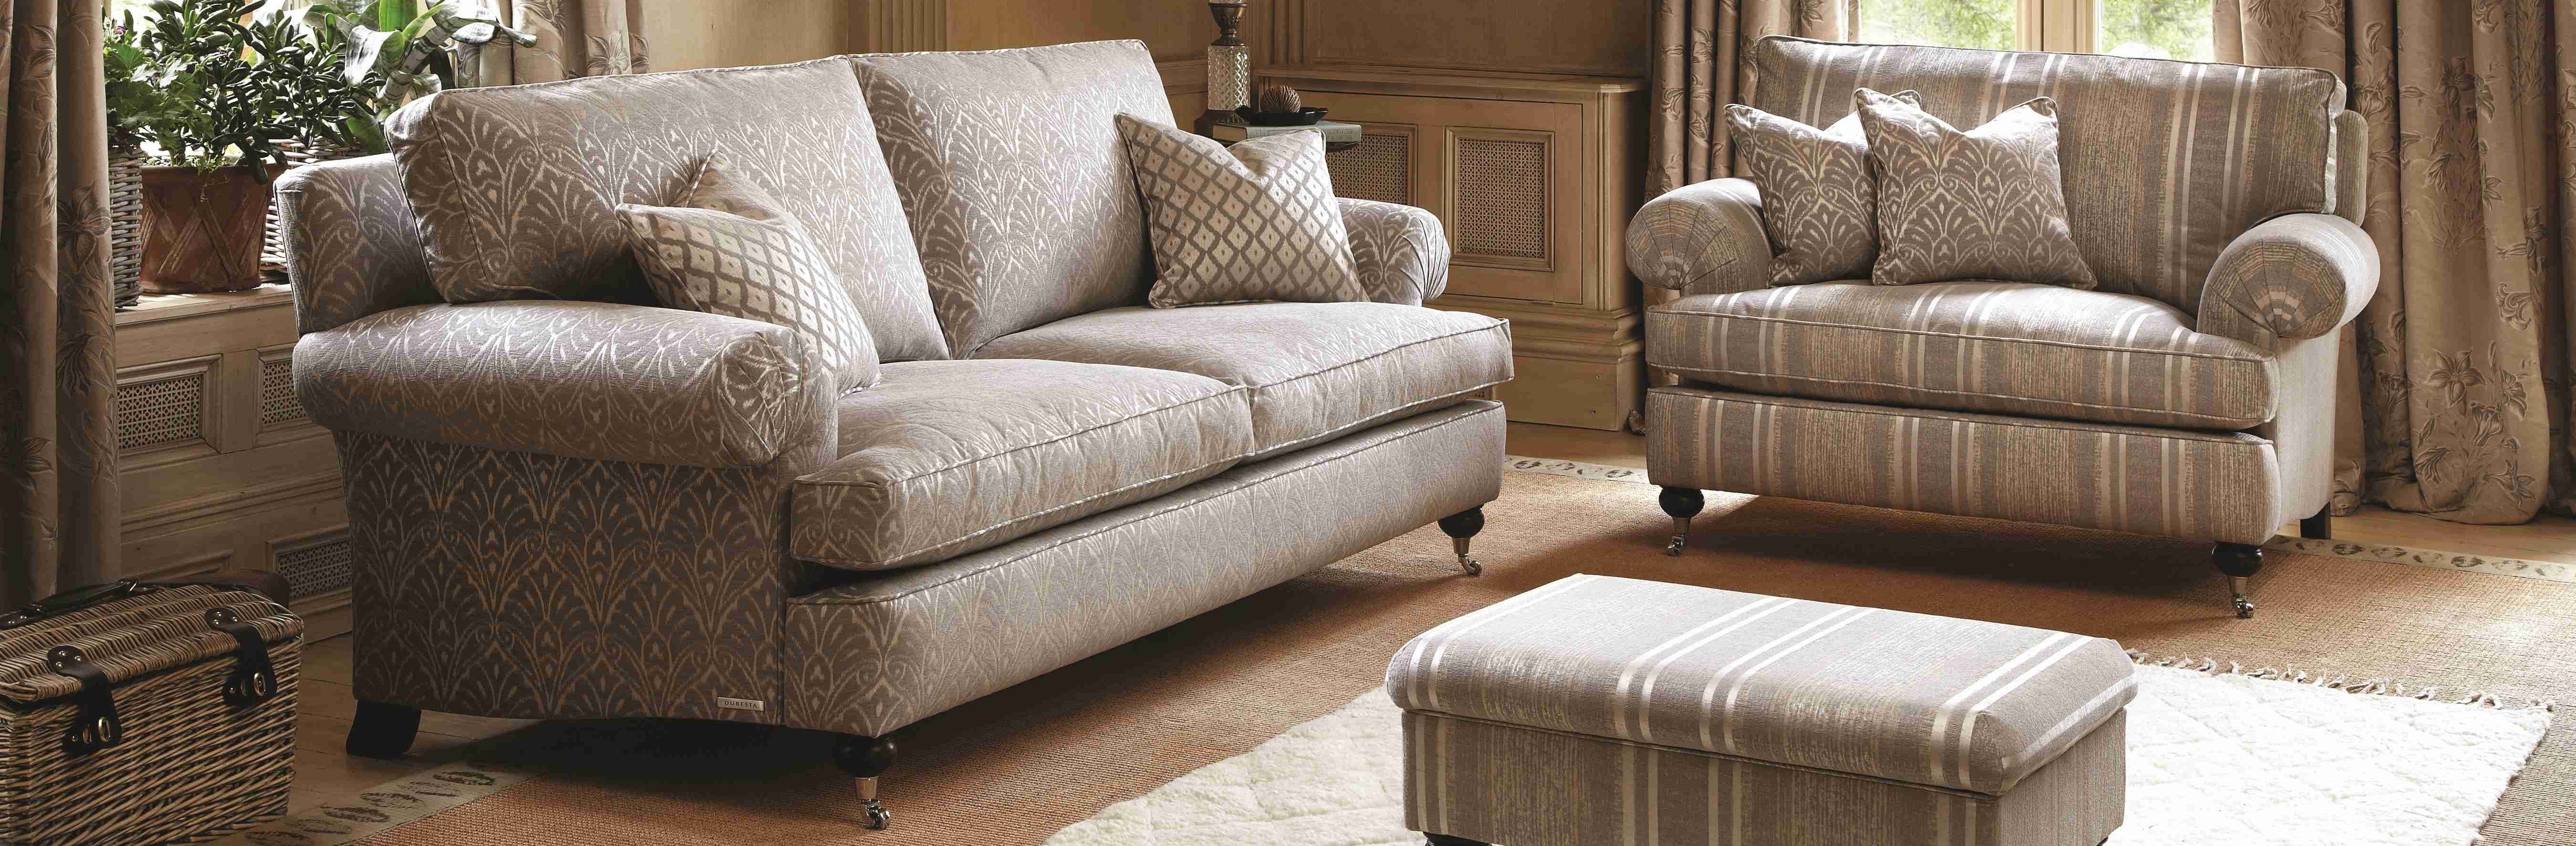 Upholstery & Drapery Services